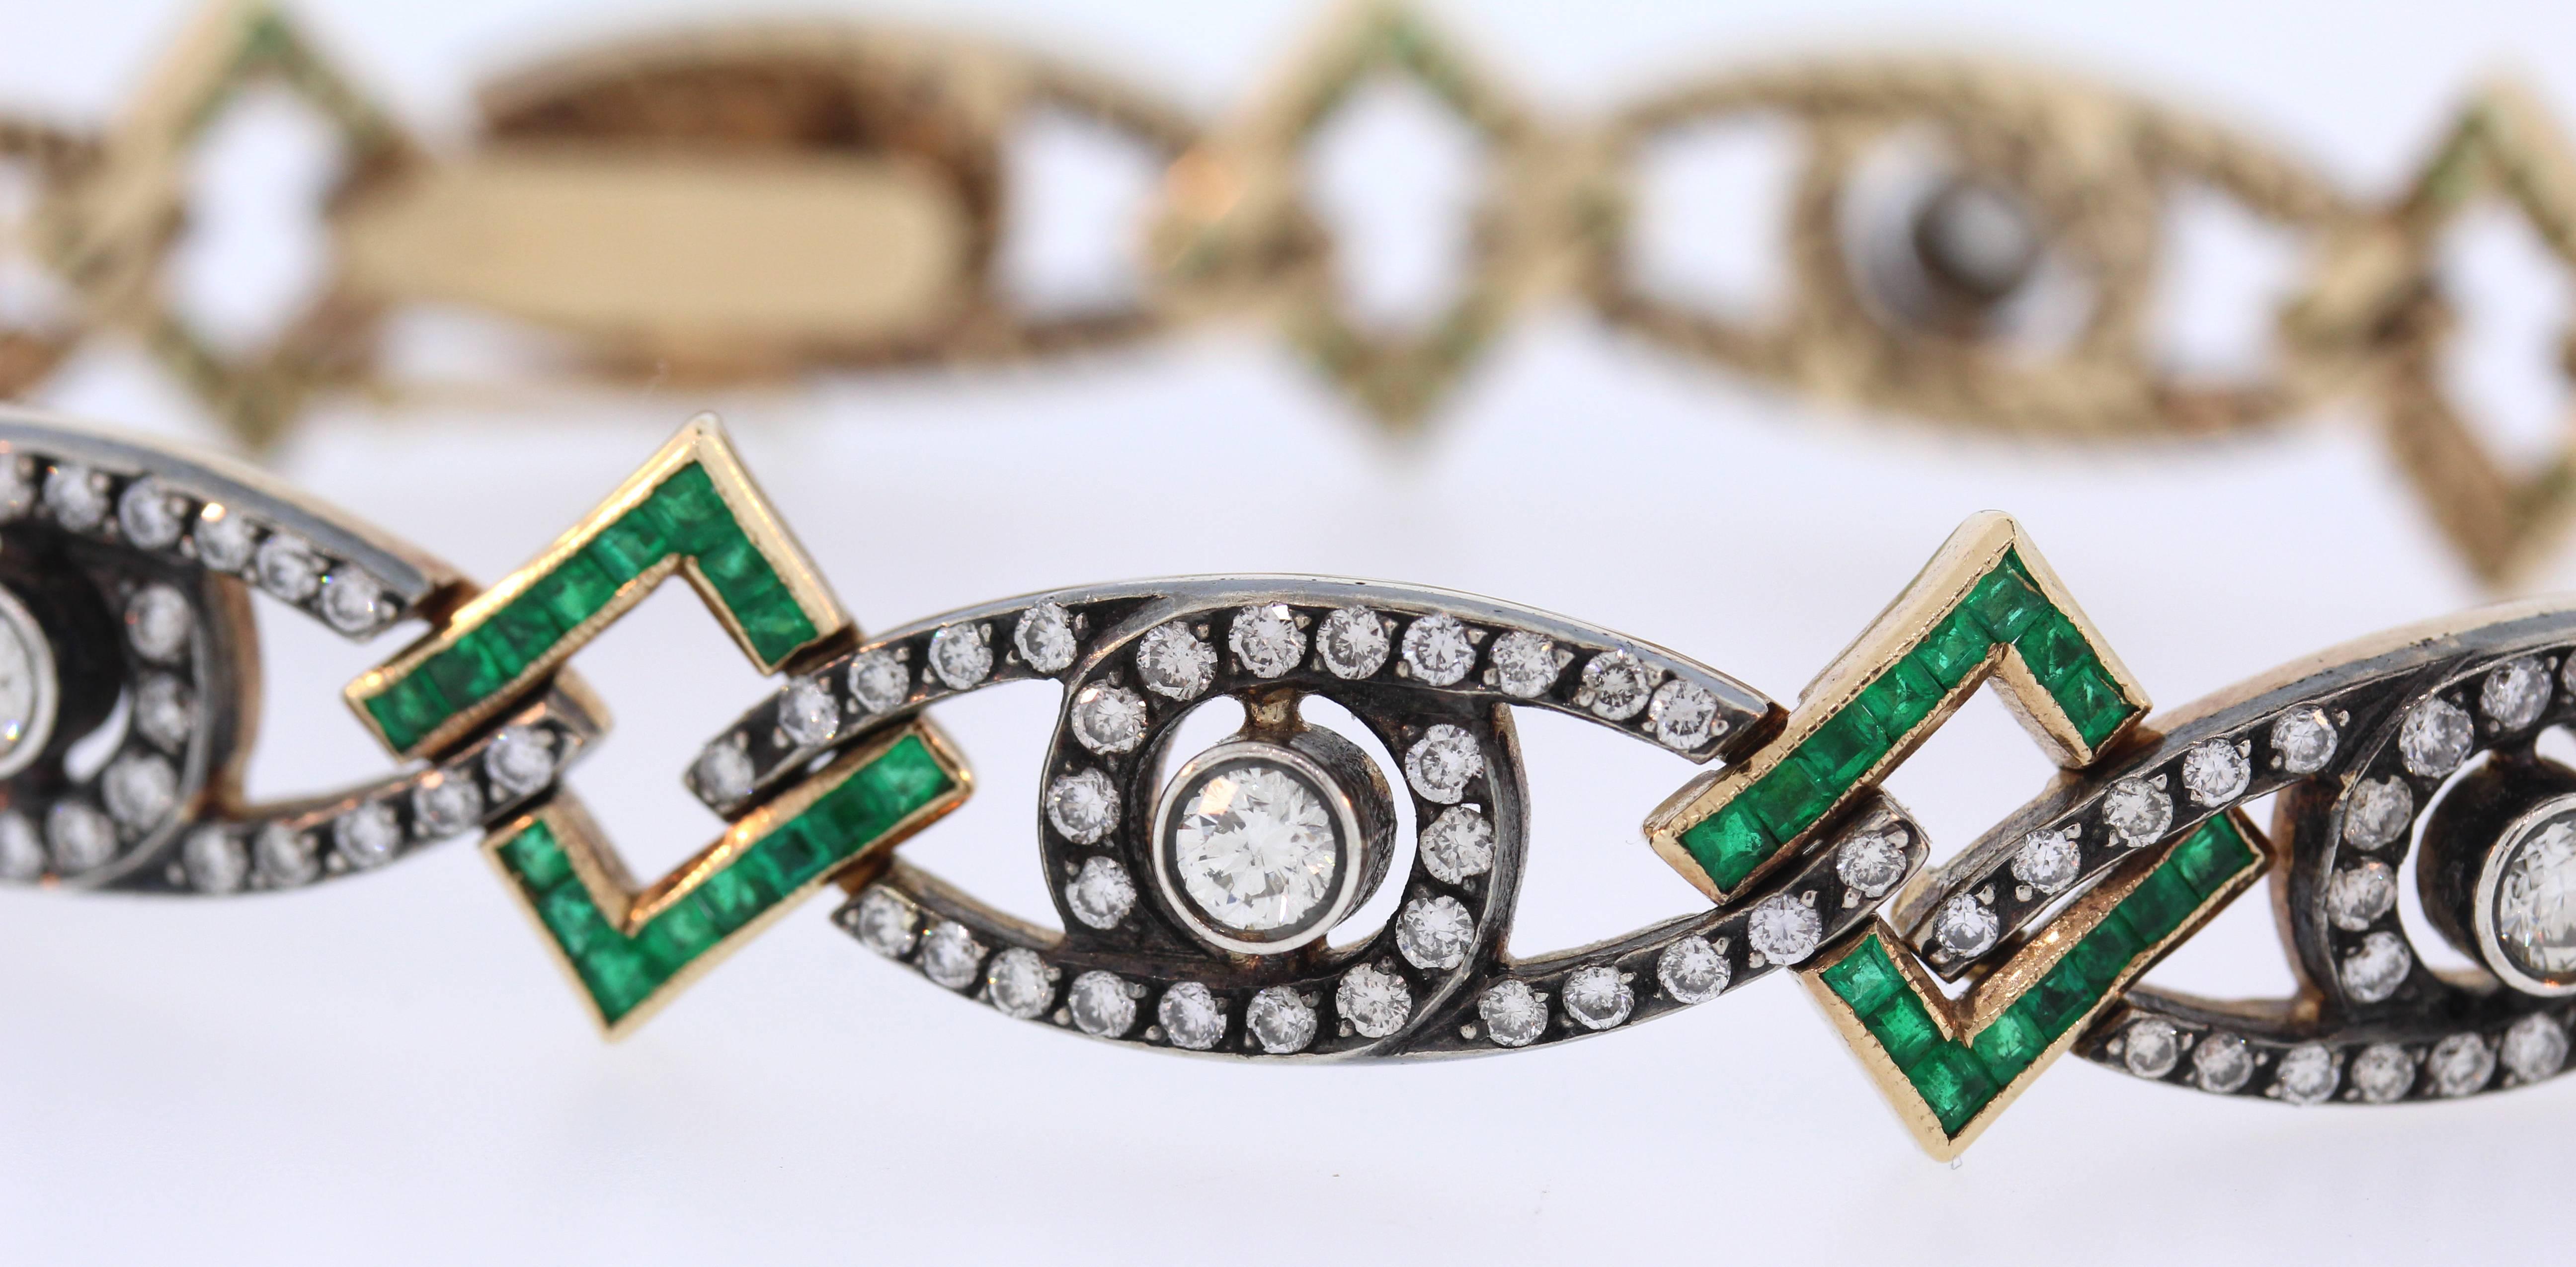 Antique 18K Gold Bracelet with Emeralds and Diamonds

Diamonds are set on blackened gold.

7 round (0.20ct. apprx each) diamonds are surrounded by diamonds. Each section separated by emerald set links. 

Antique, from 1950s. 

Bracelet is 7 inches